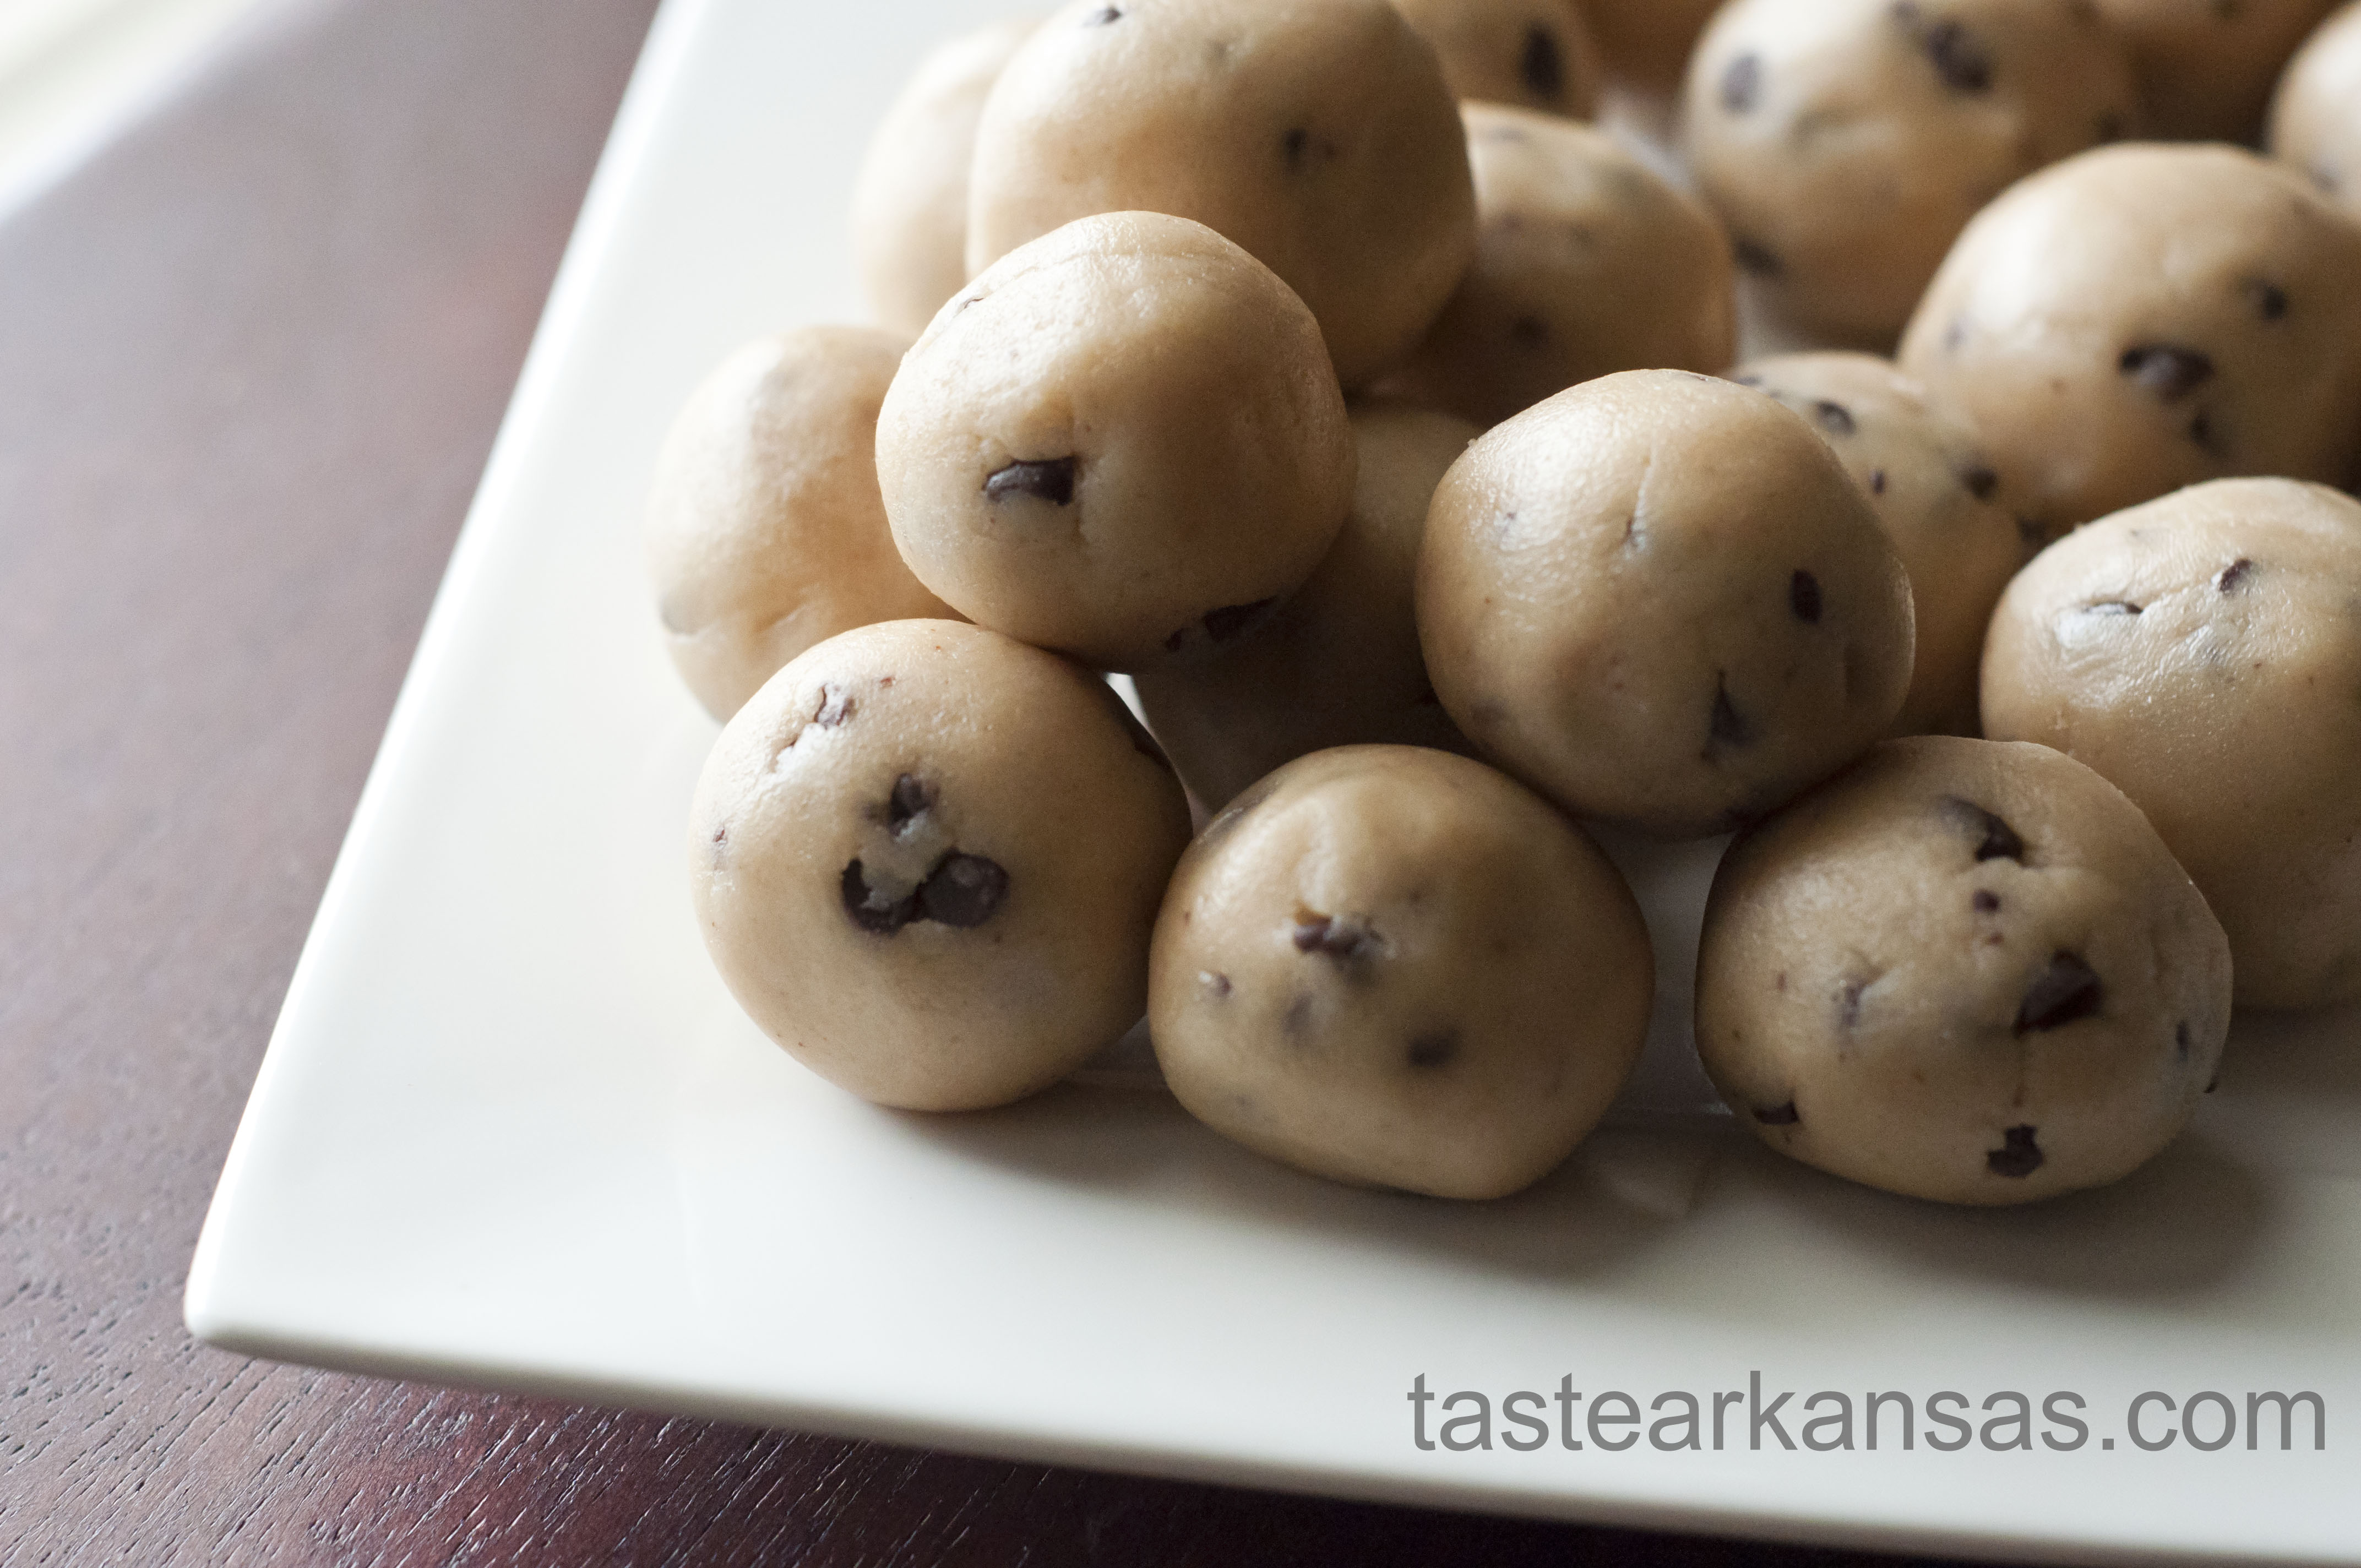 this image is of a plate of cookie dough bites that have no eggs and don't require any baking